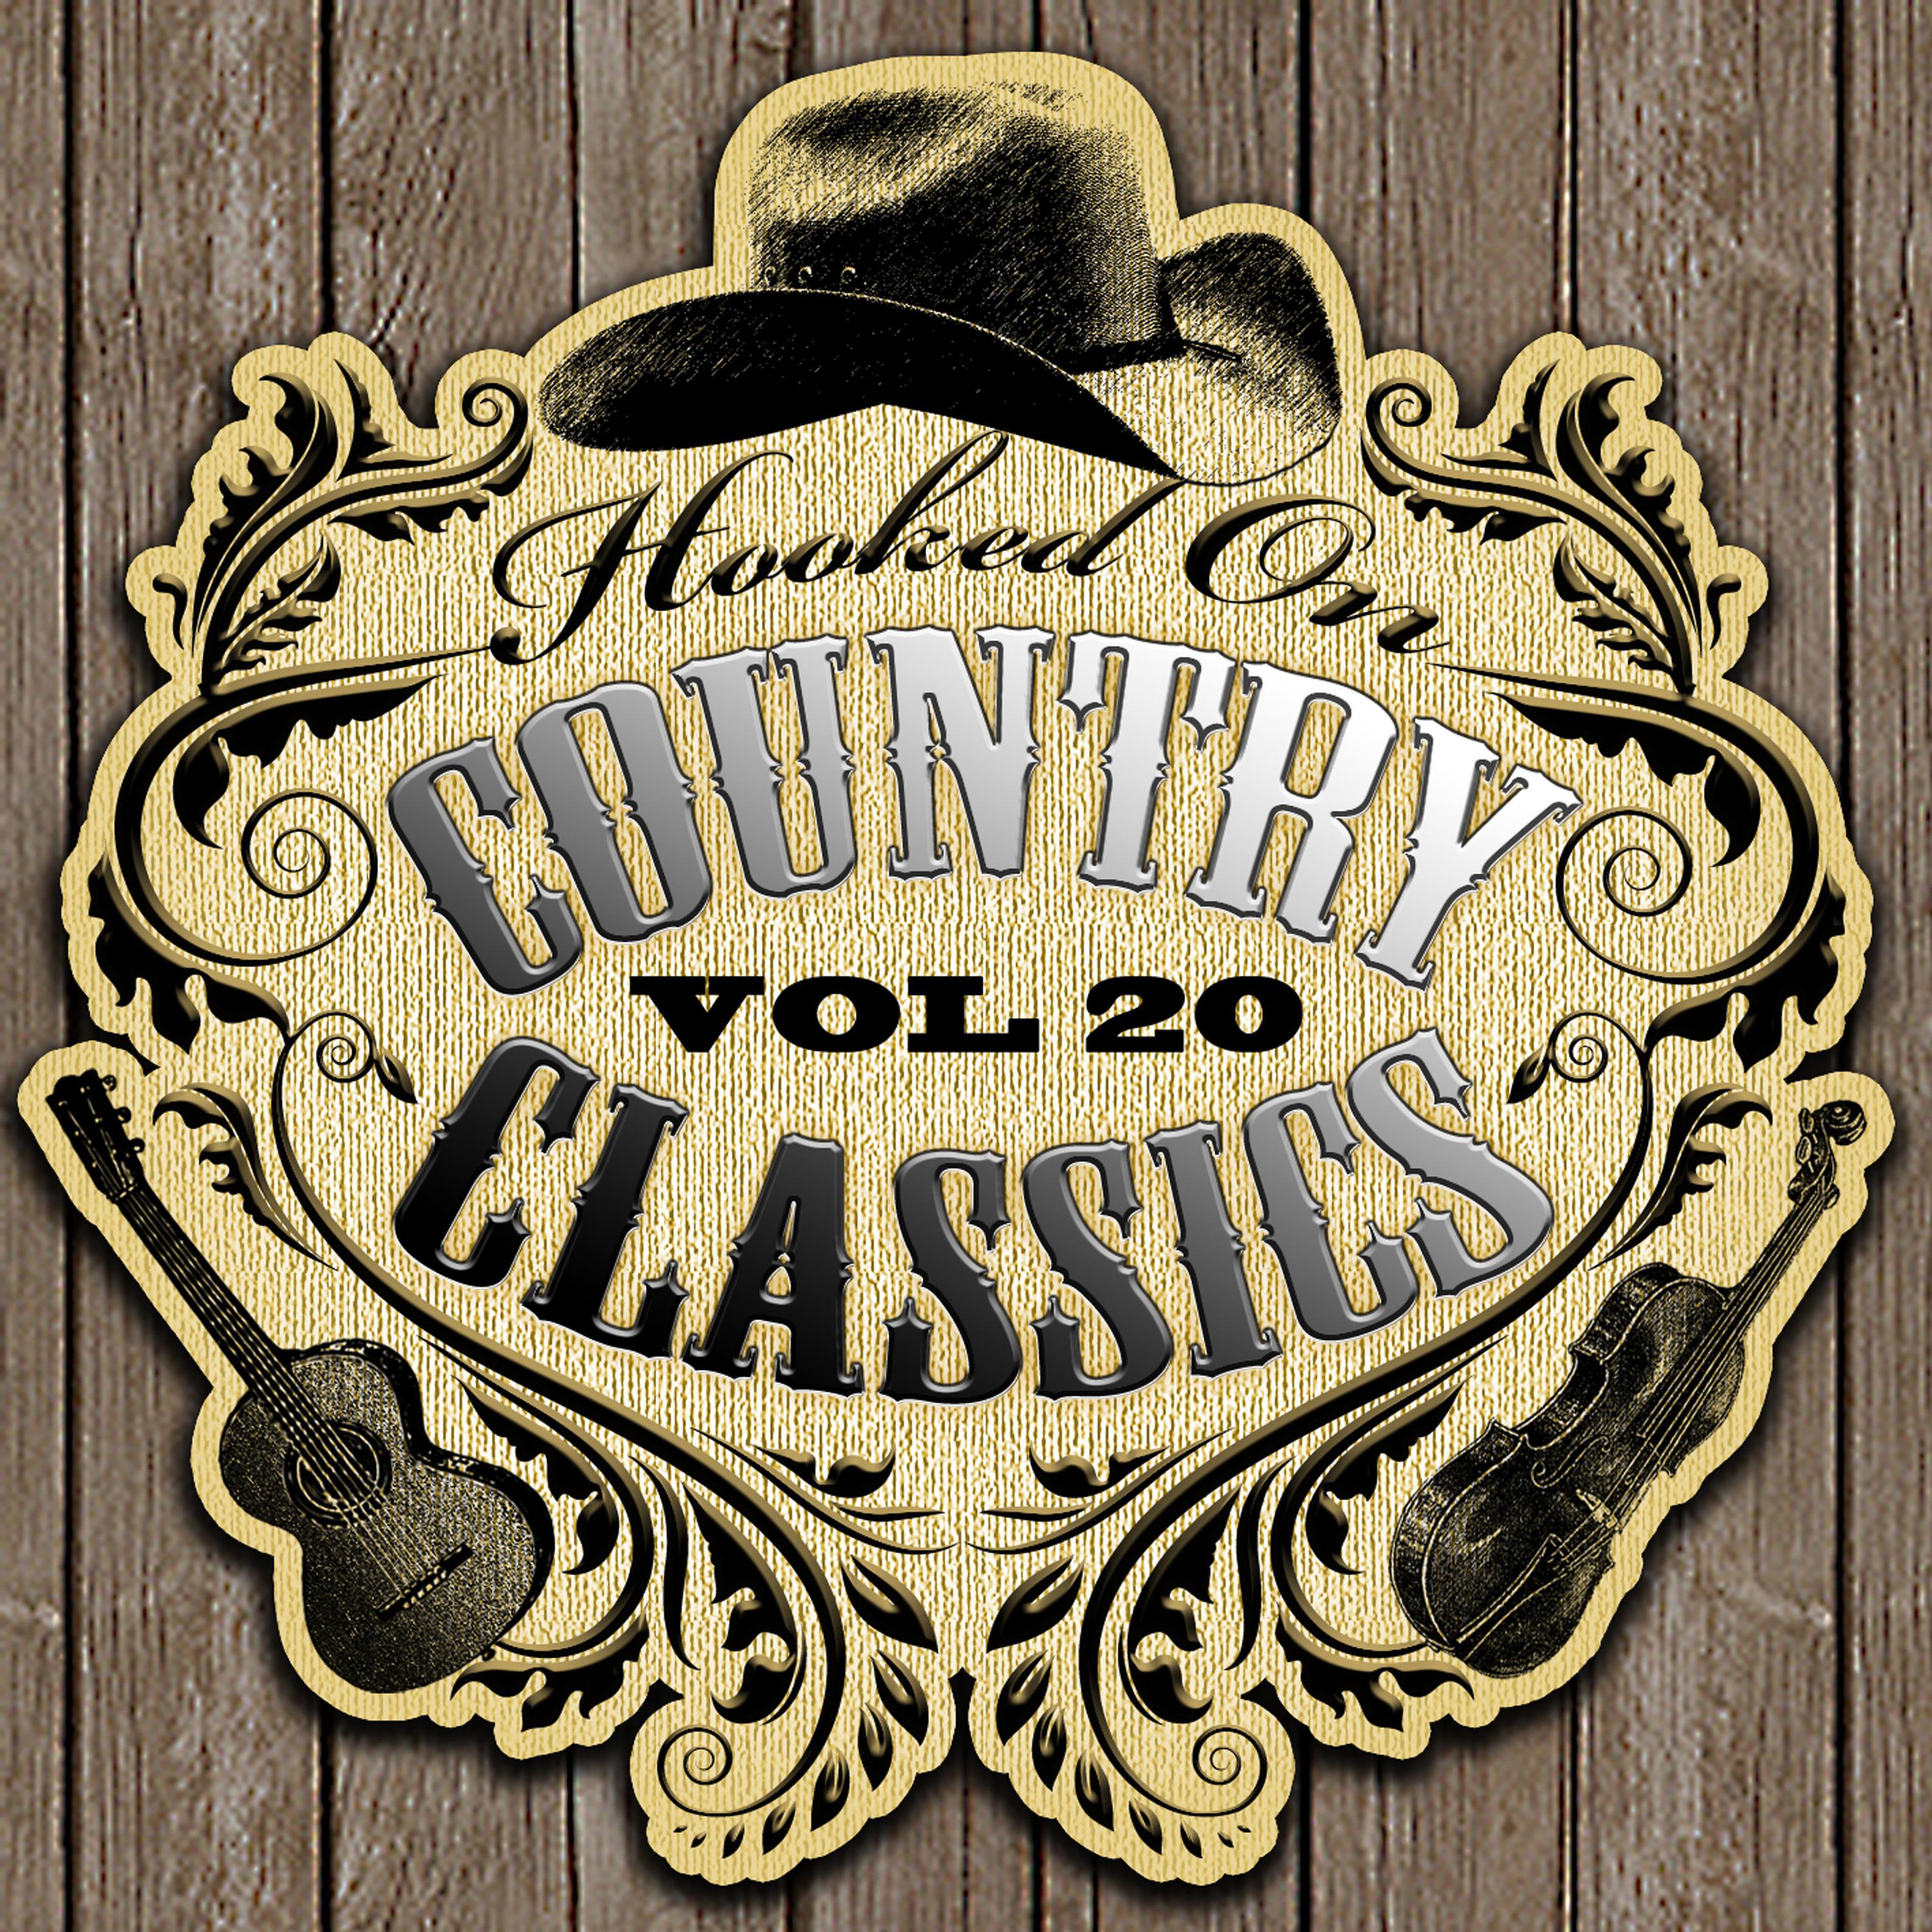 Hooked On Country Classics, Vol. 20